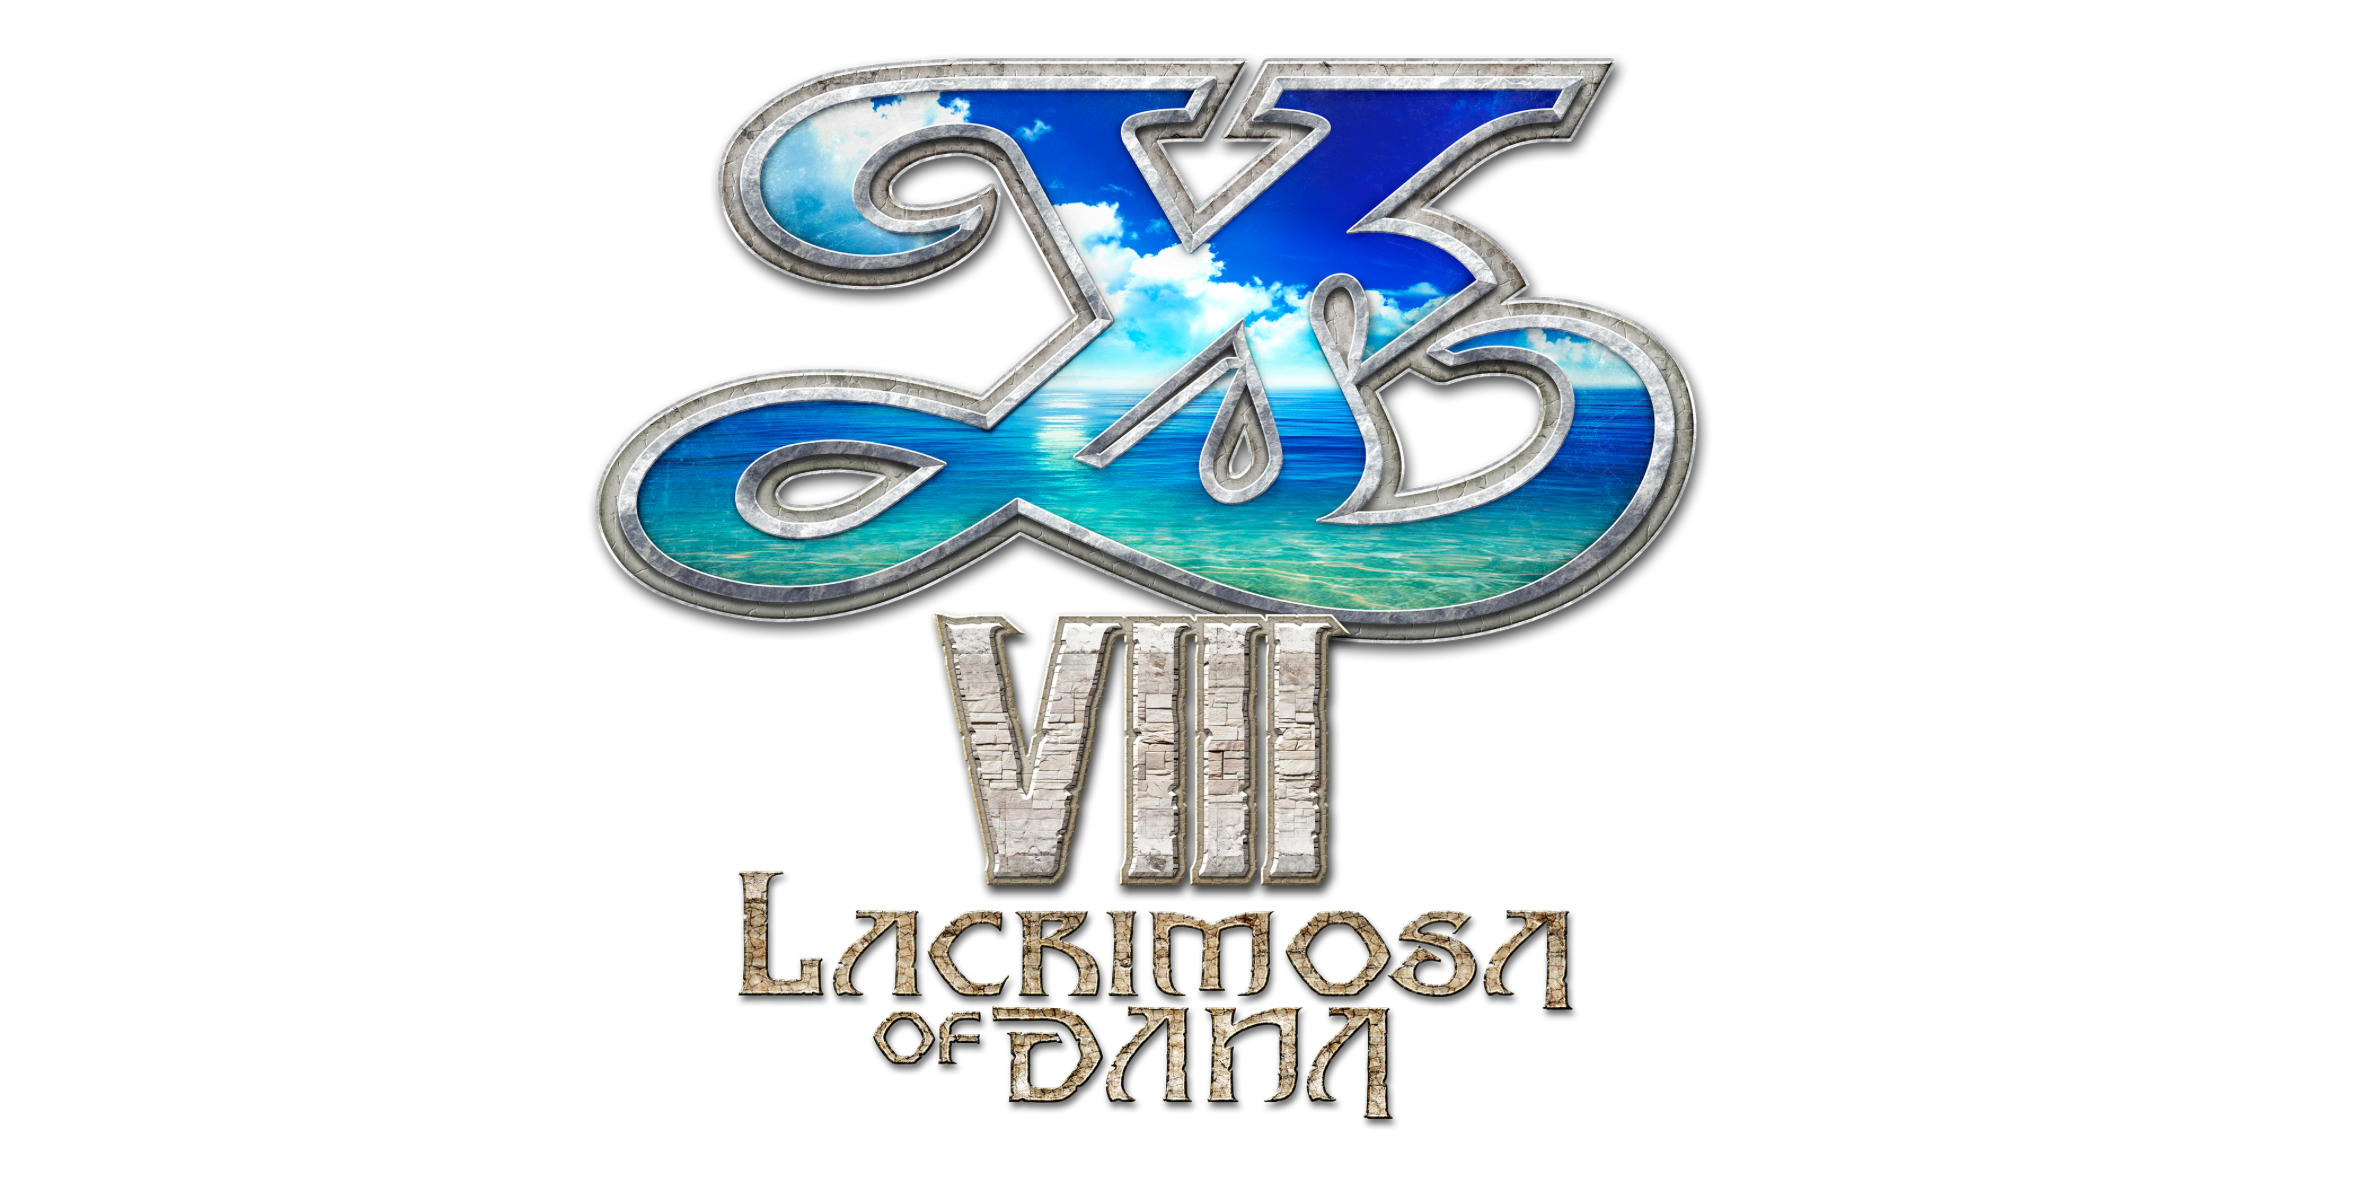 Deal of the Week | Ys VIII: Lacrimosa of DANA | Deluxe Edition | PS5™